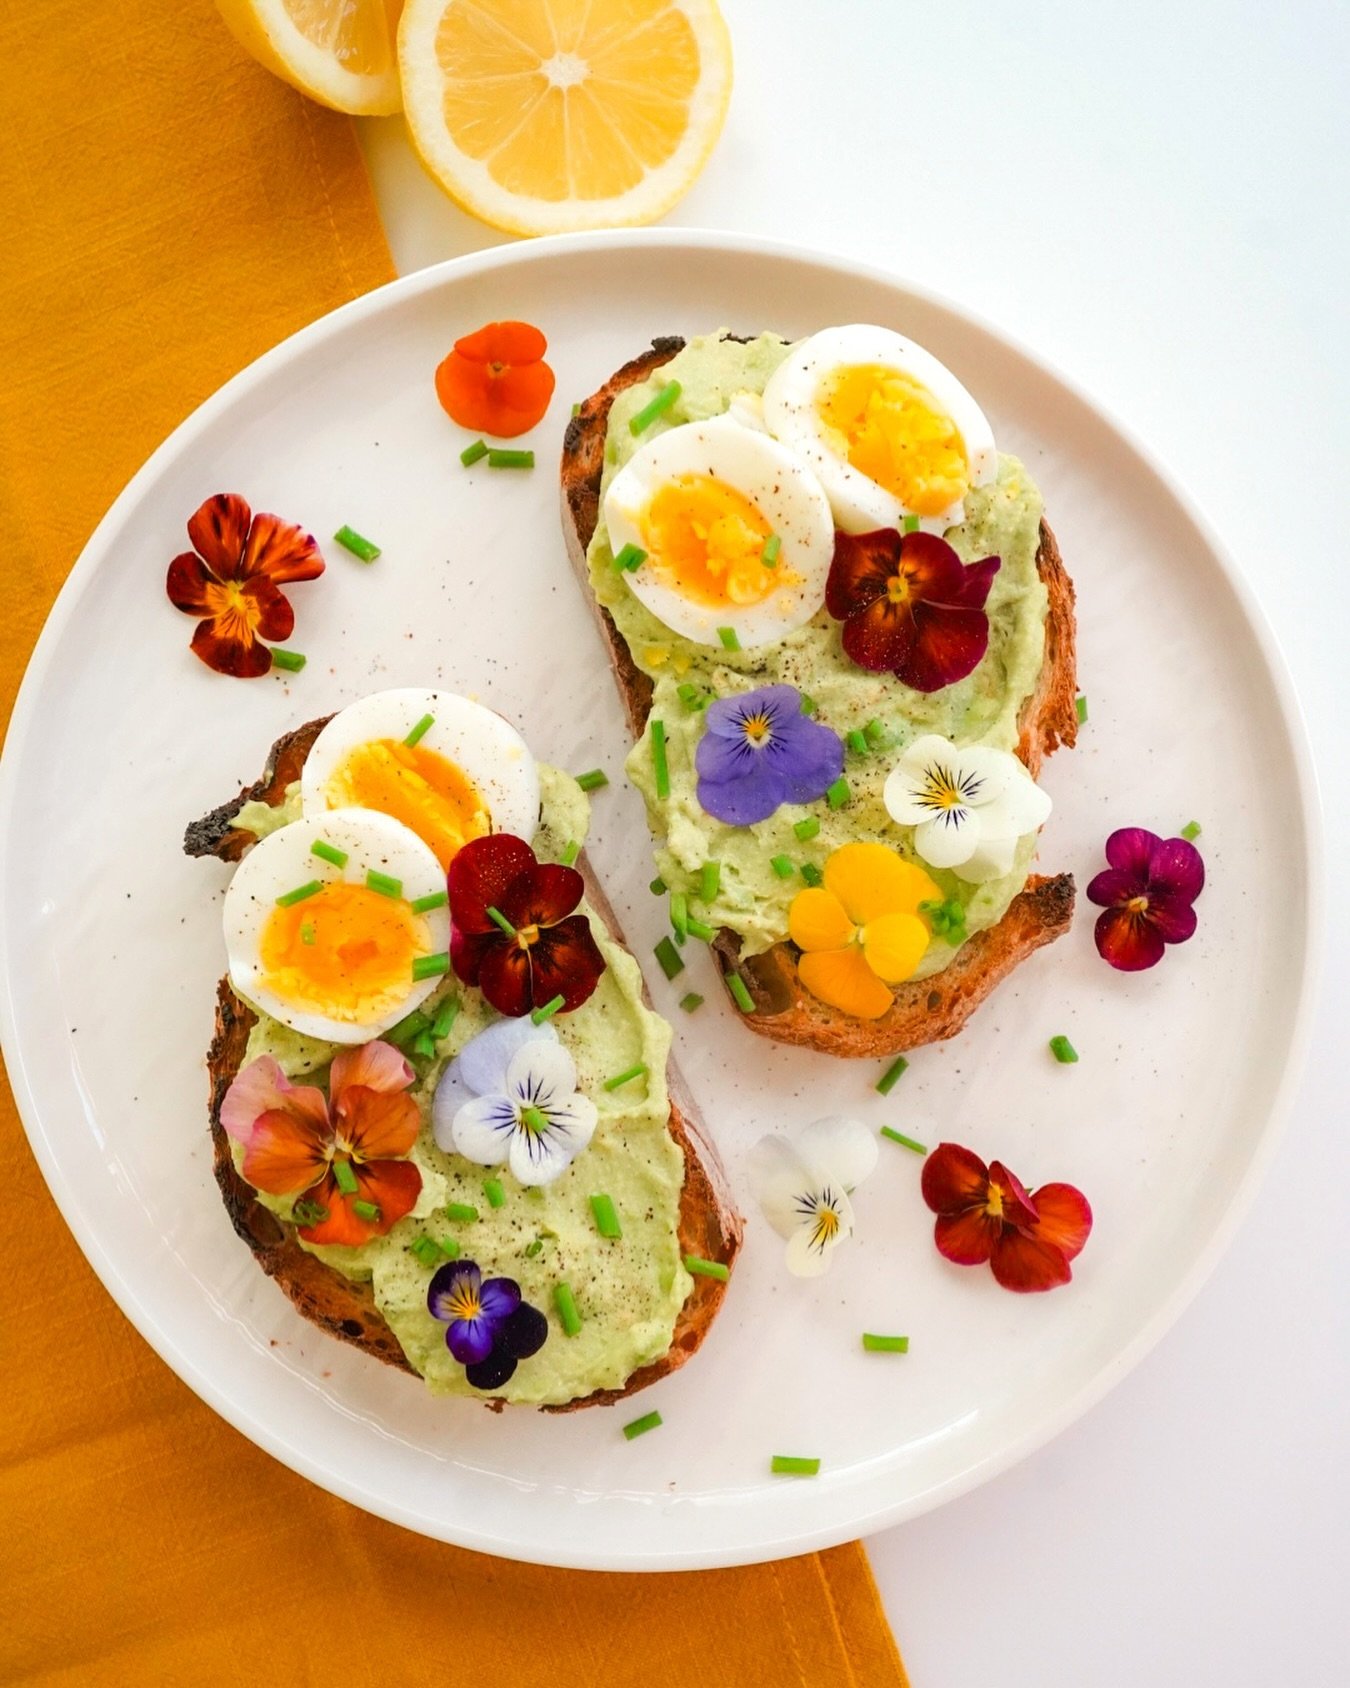 Peachy Bakes Presents:

Whipped Lemon Ricotta Avocado Toast with &ldquo;semi&rdquo; Soft Boiled Eggs and Edible Flowers

This morning Fiona &amp; I got up bright and early and headed to the @ptreefarmersmkt! We haven&rsquo;t been since moving to and 